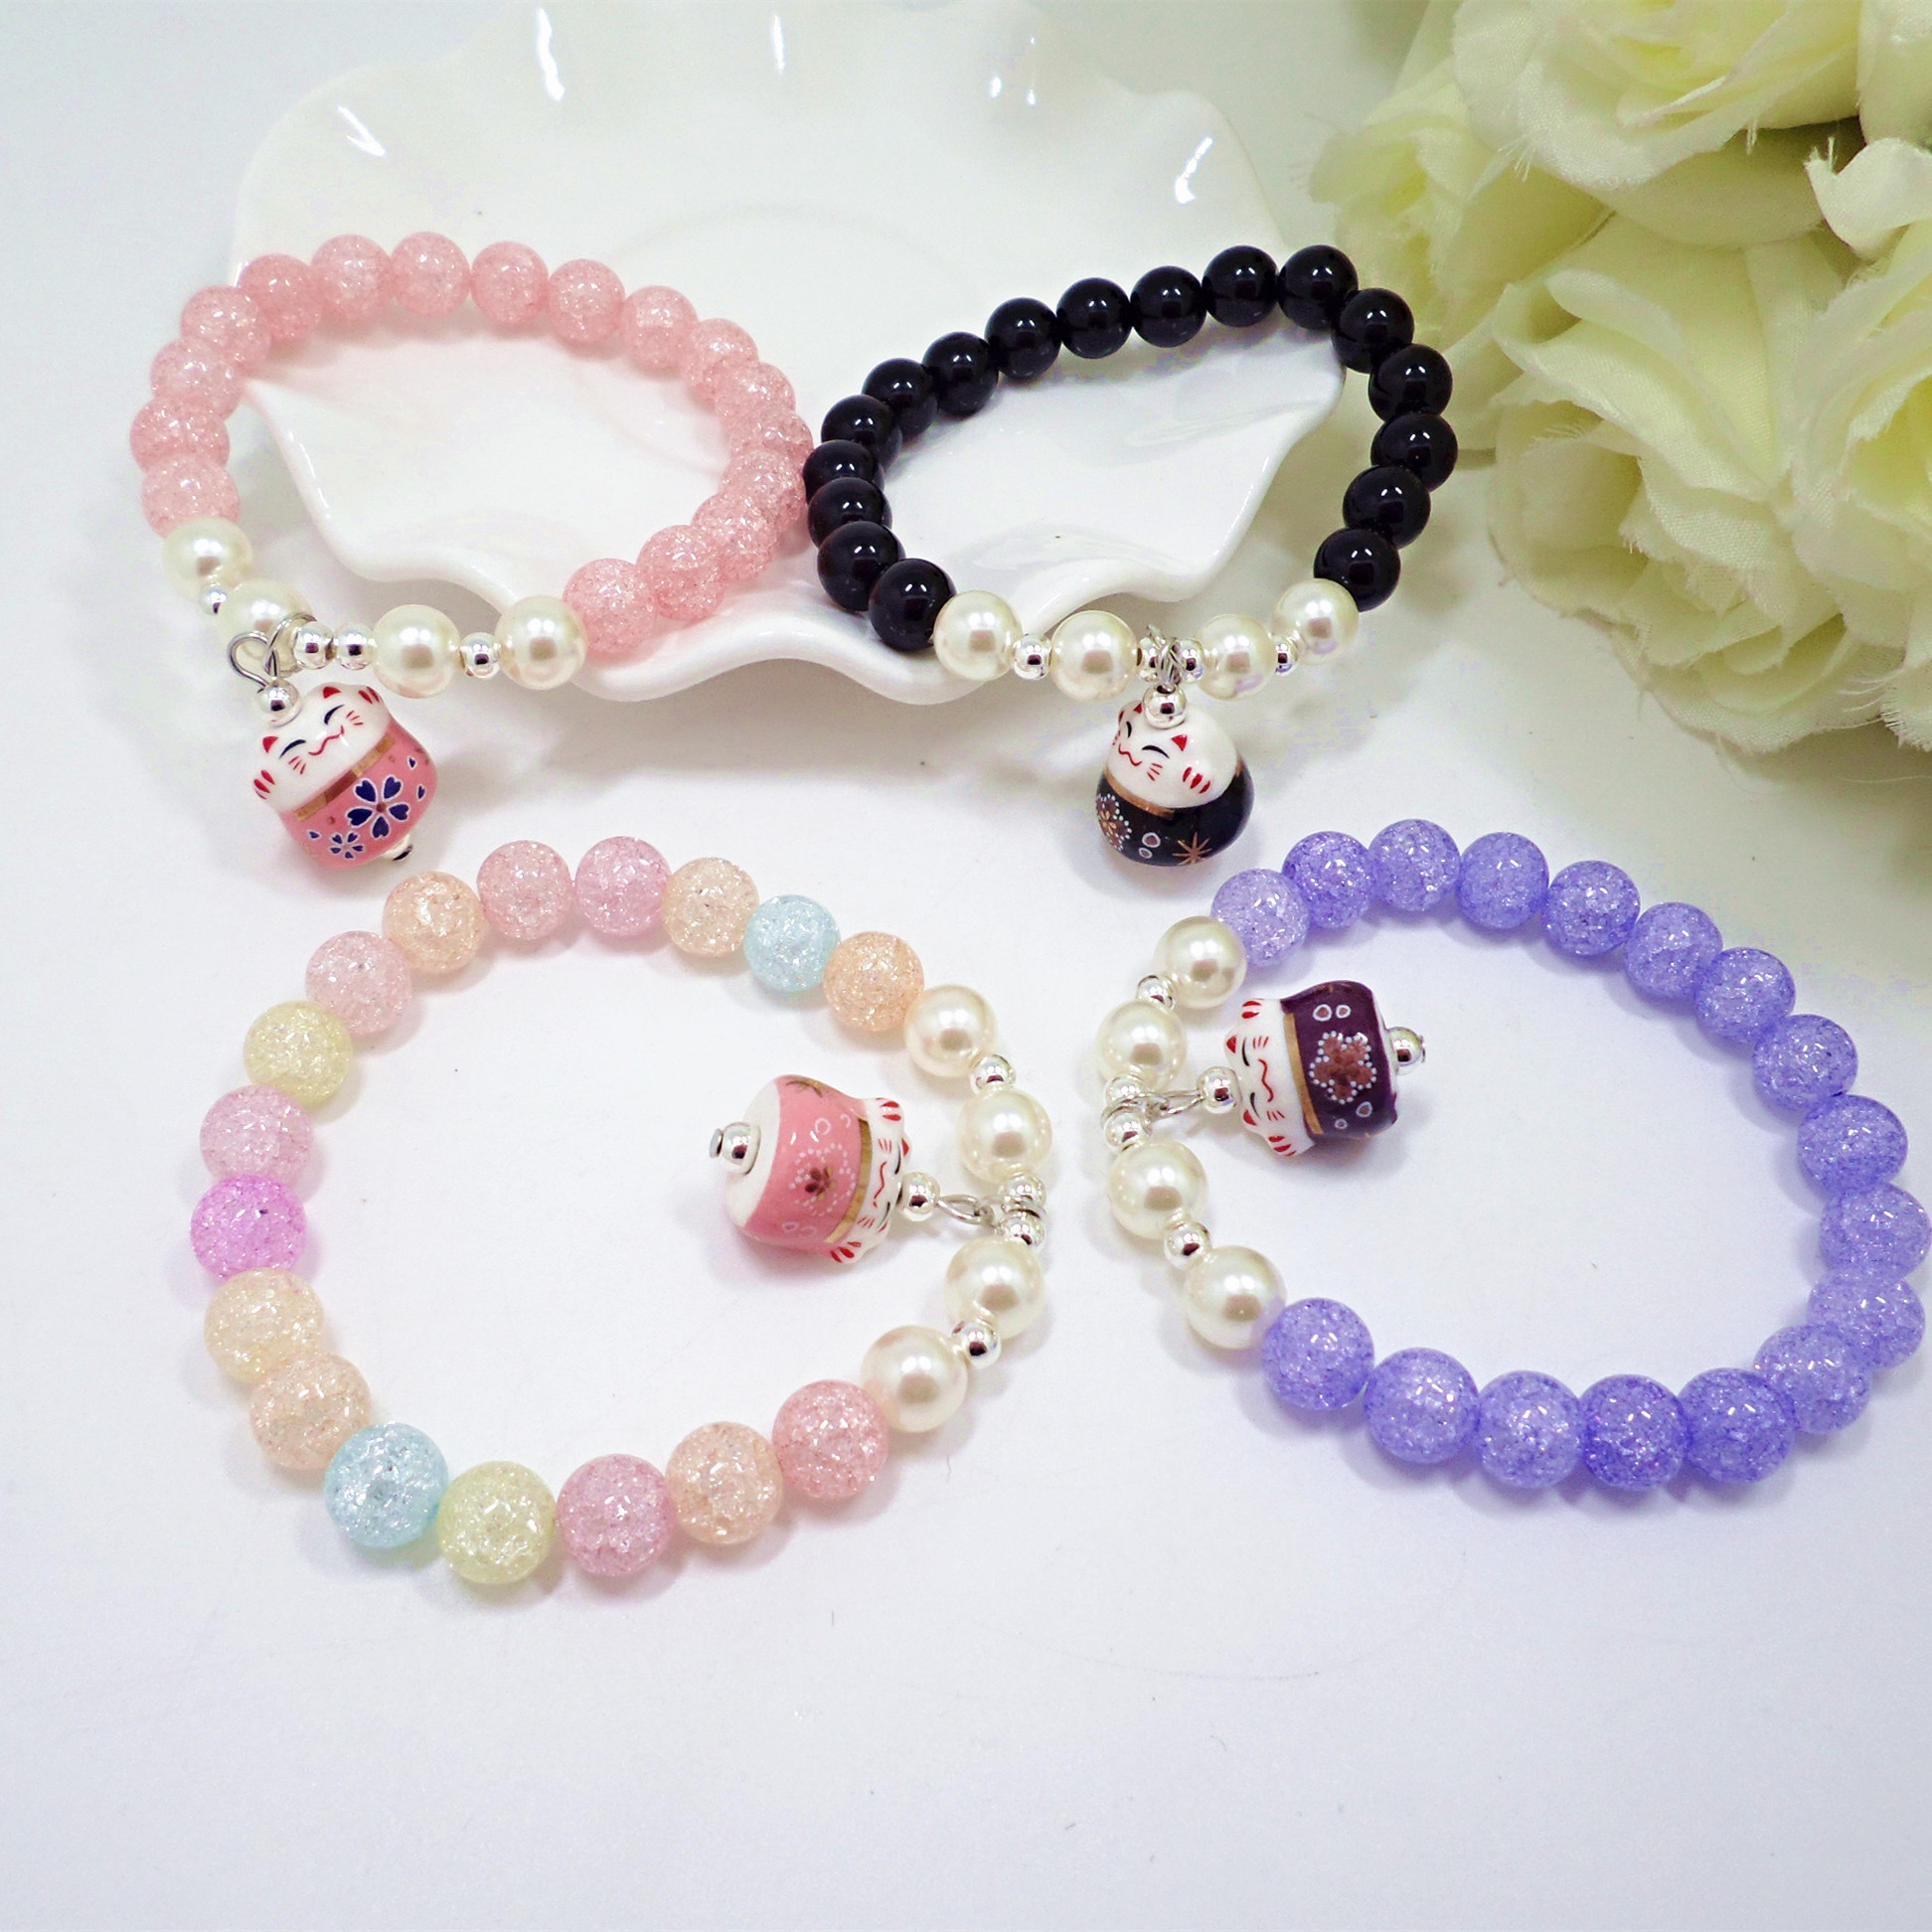 Wholesale Trendy Lucky Cats Natural Crystal Ball Beads Elastic Bracelets & Bangles For Women Fashion Hands Jewelry Lovely Bracelet VGB079 1